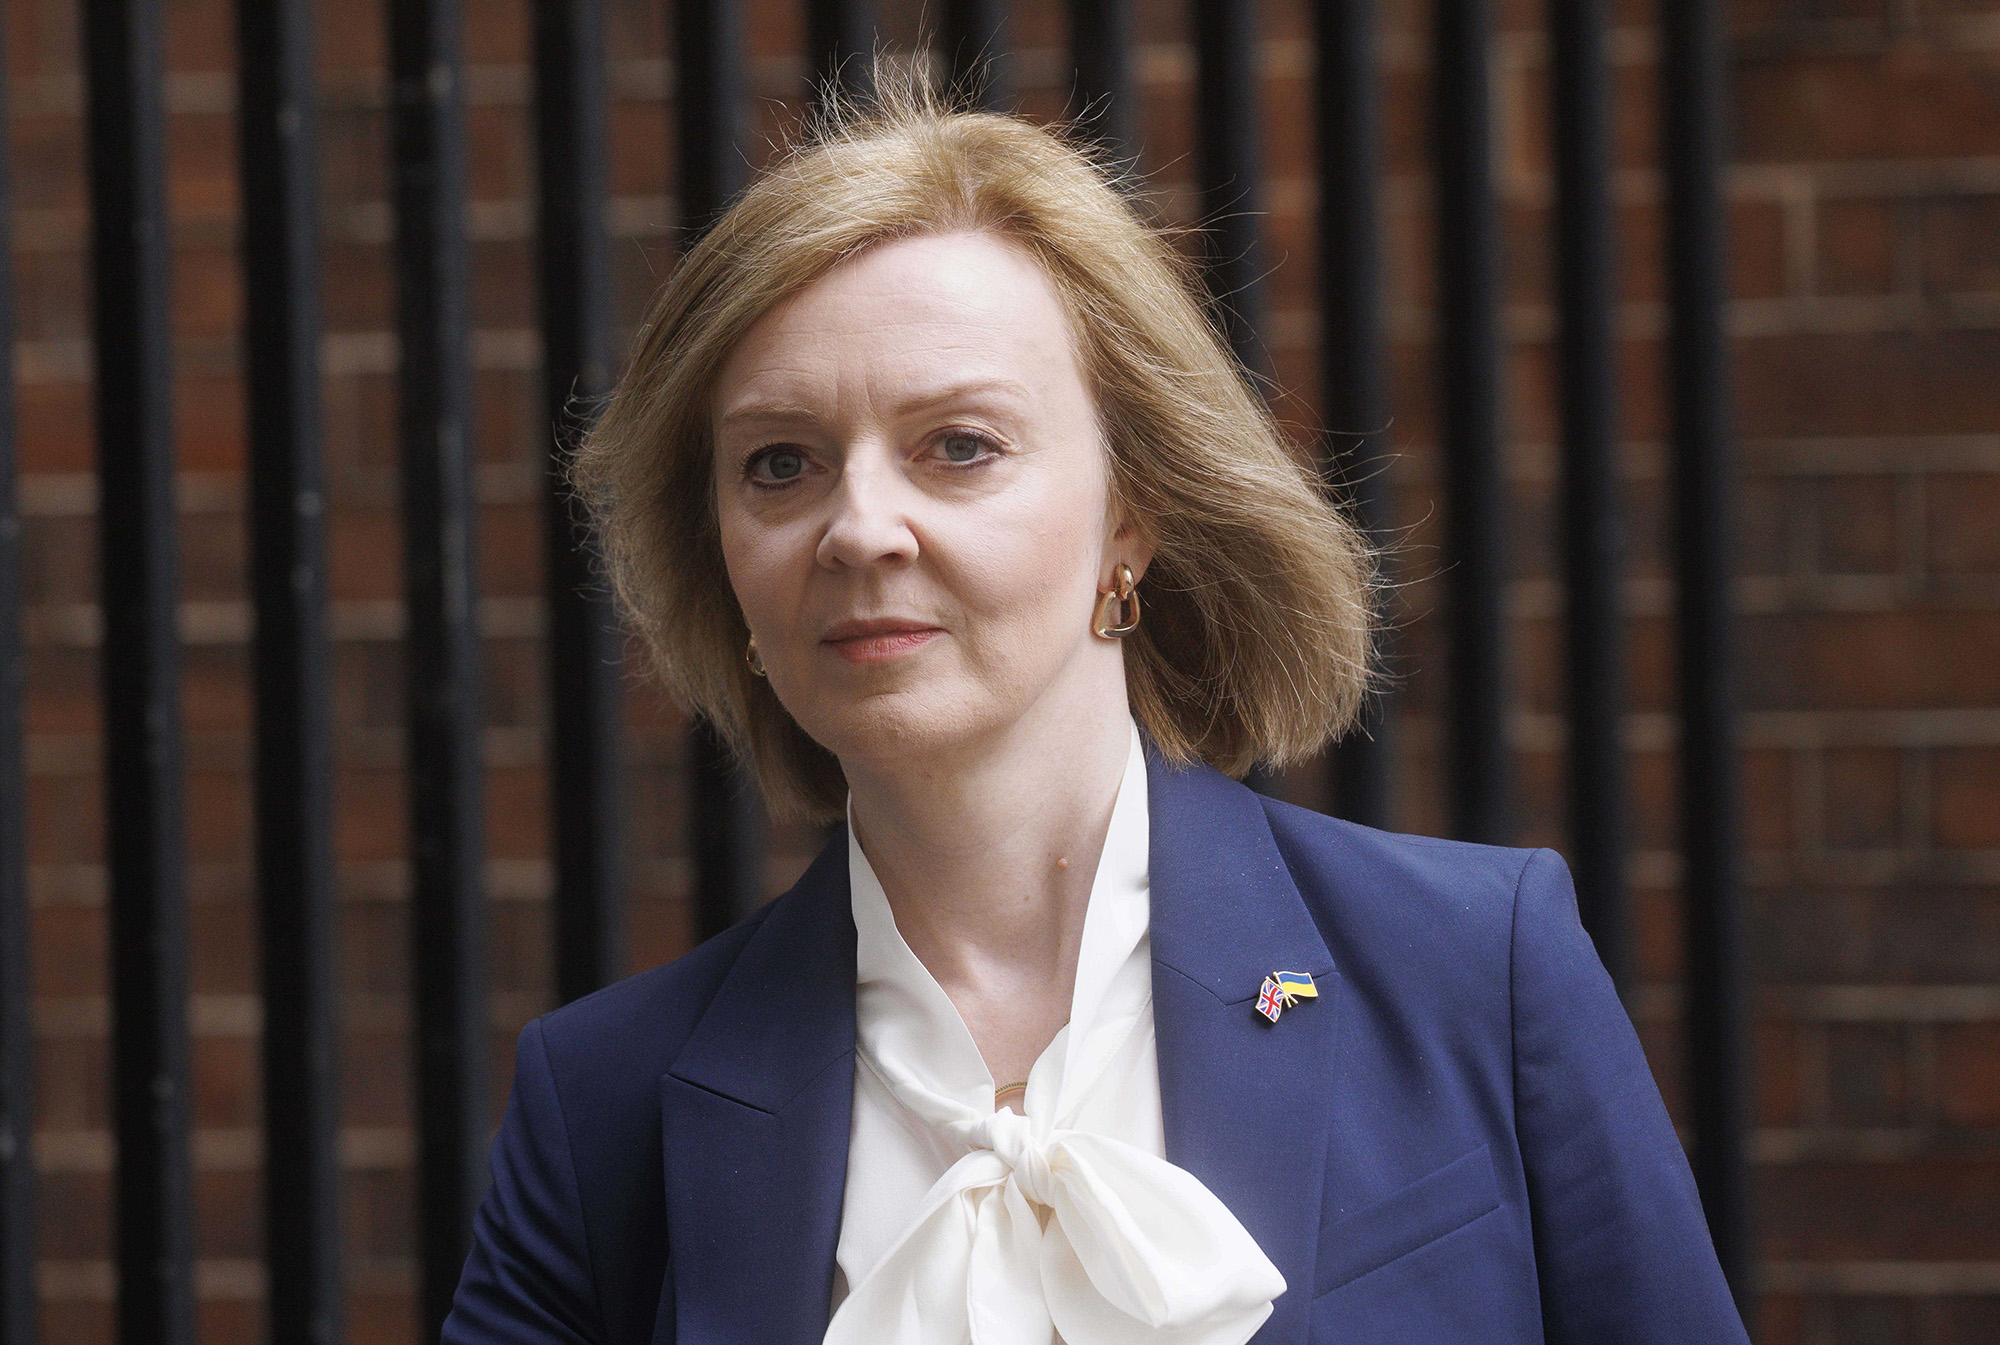 Foreign Secretary Liz Truss at Downing Street for a cabinet meeting on April 19 in London, England.